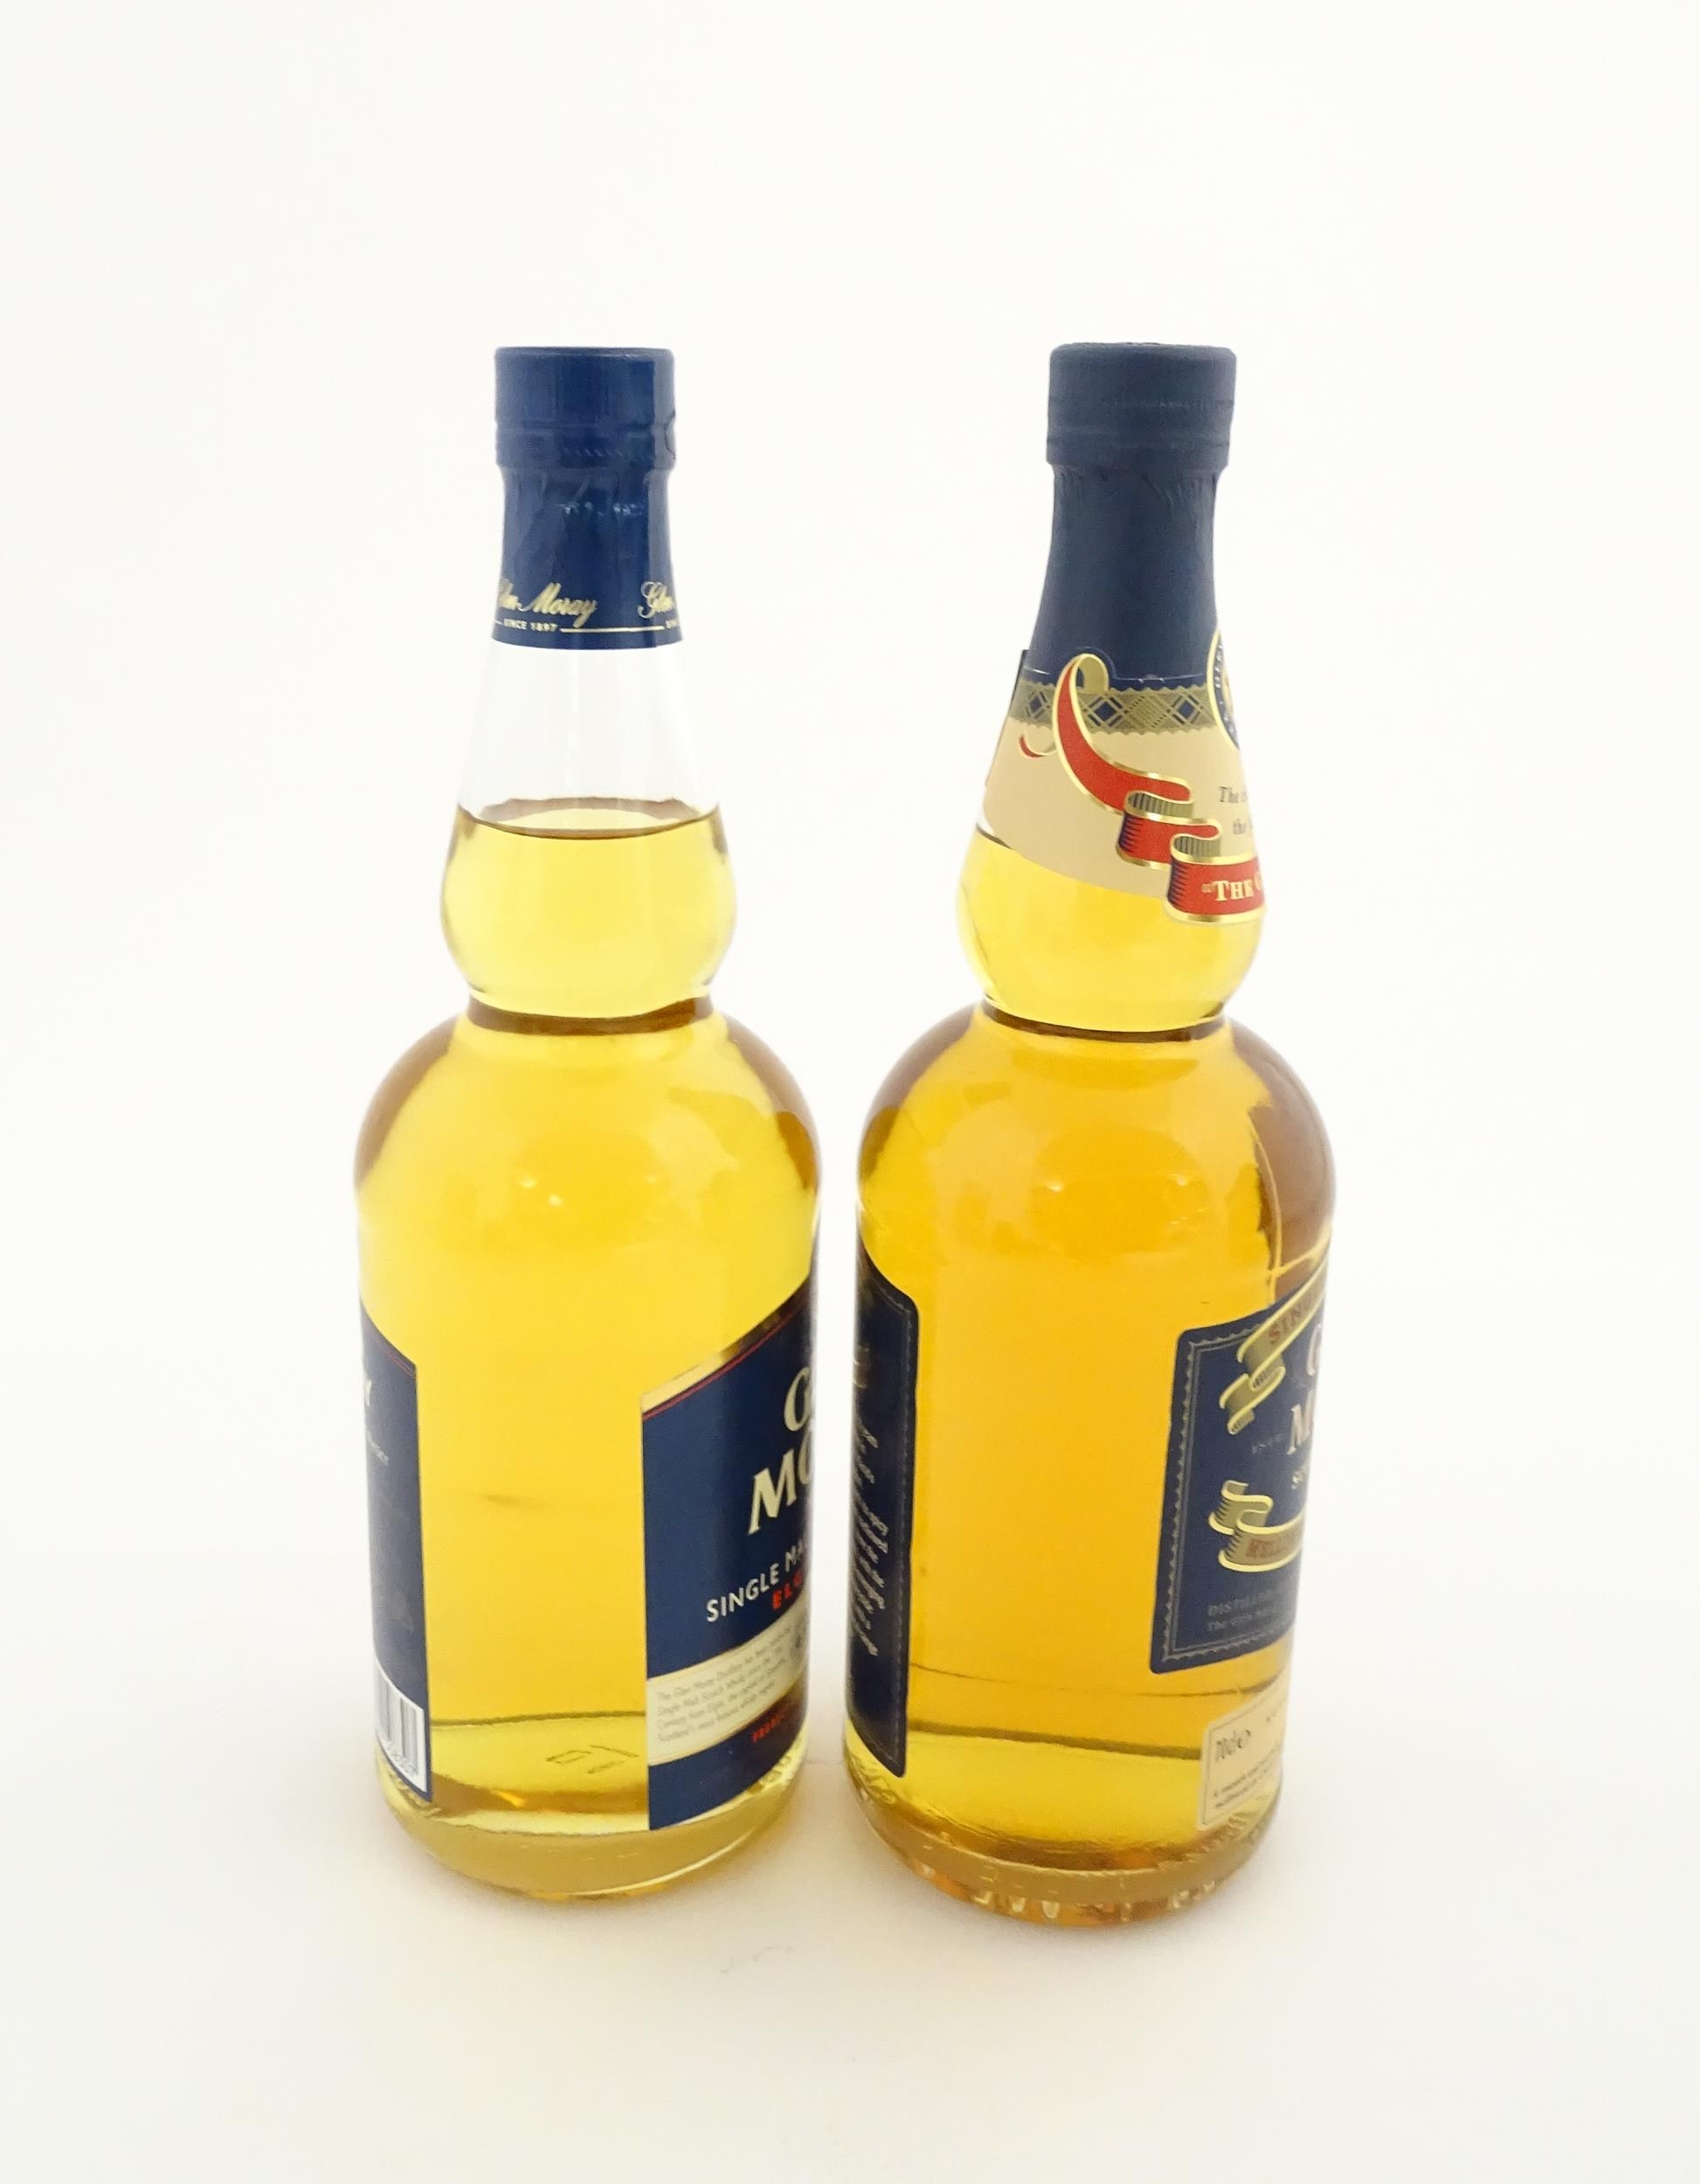 A boxed 70cl bottle of Glen Moray single malt scotch whisky, together with a boxed 70cl bottle of - Image 6 of 12